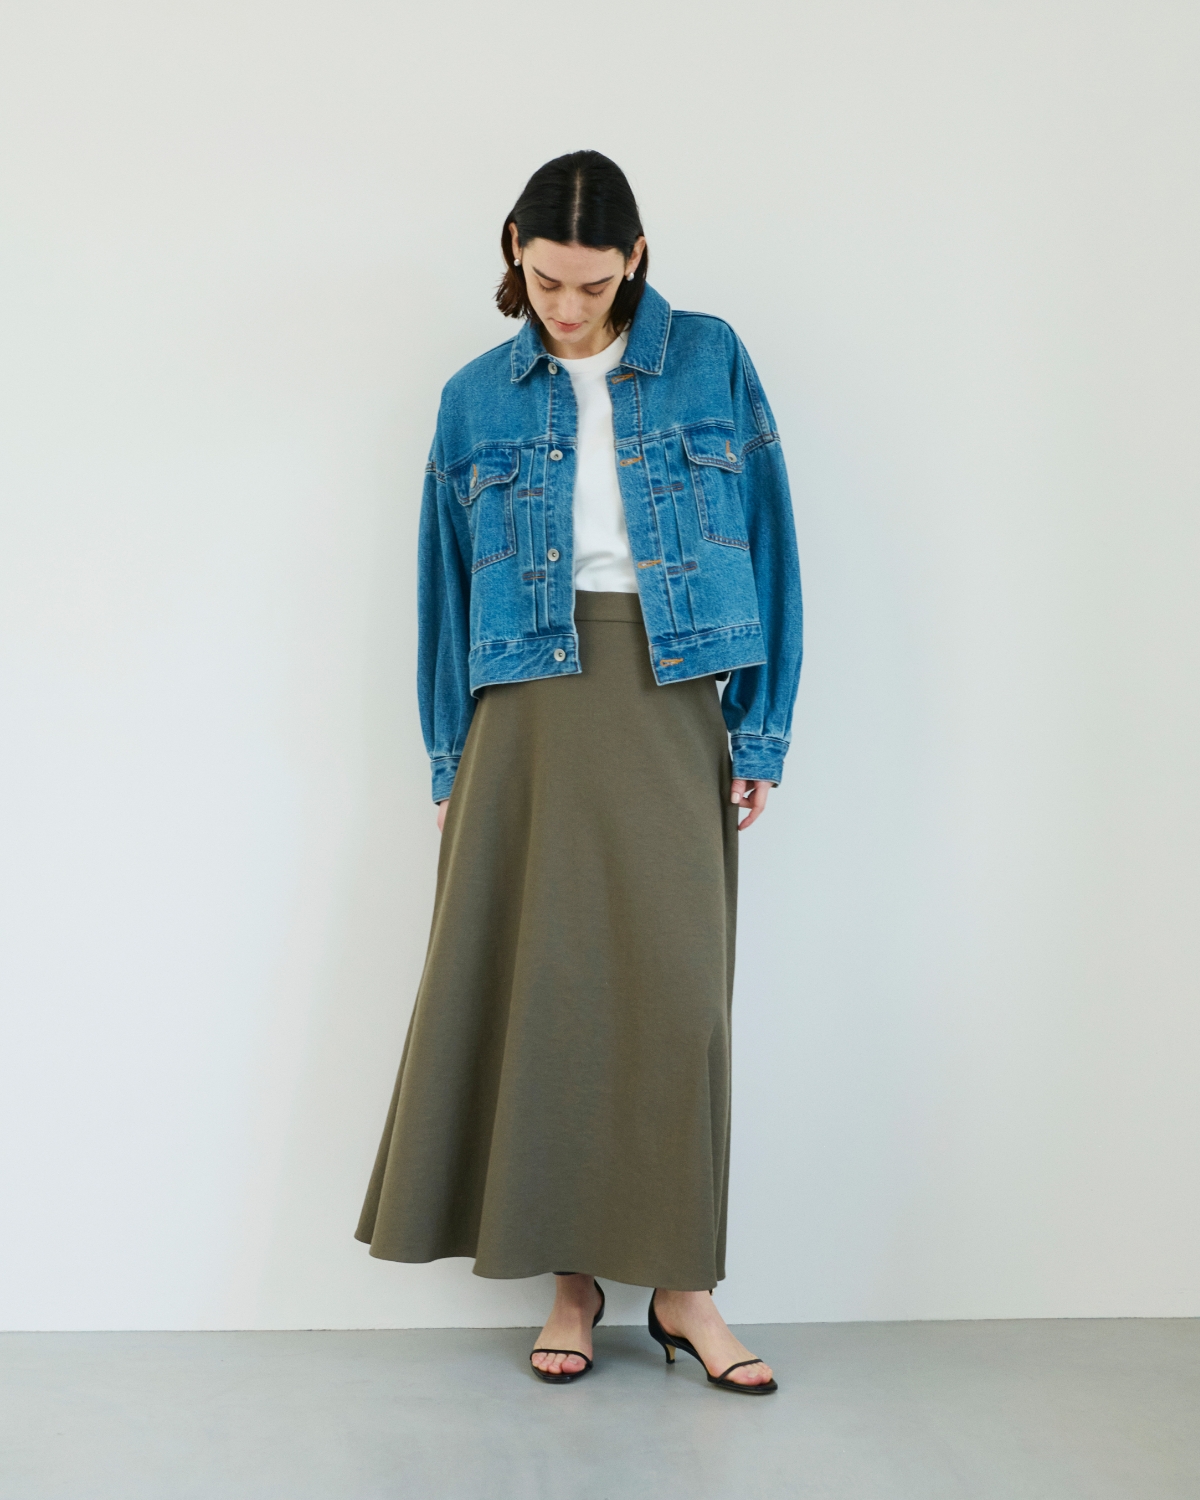 Not Just Comfort Linen for the City LINEN OX Collectionを着用している女性モデル10